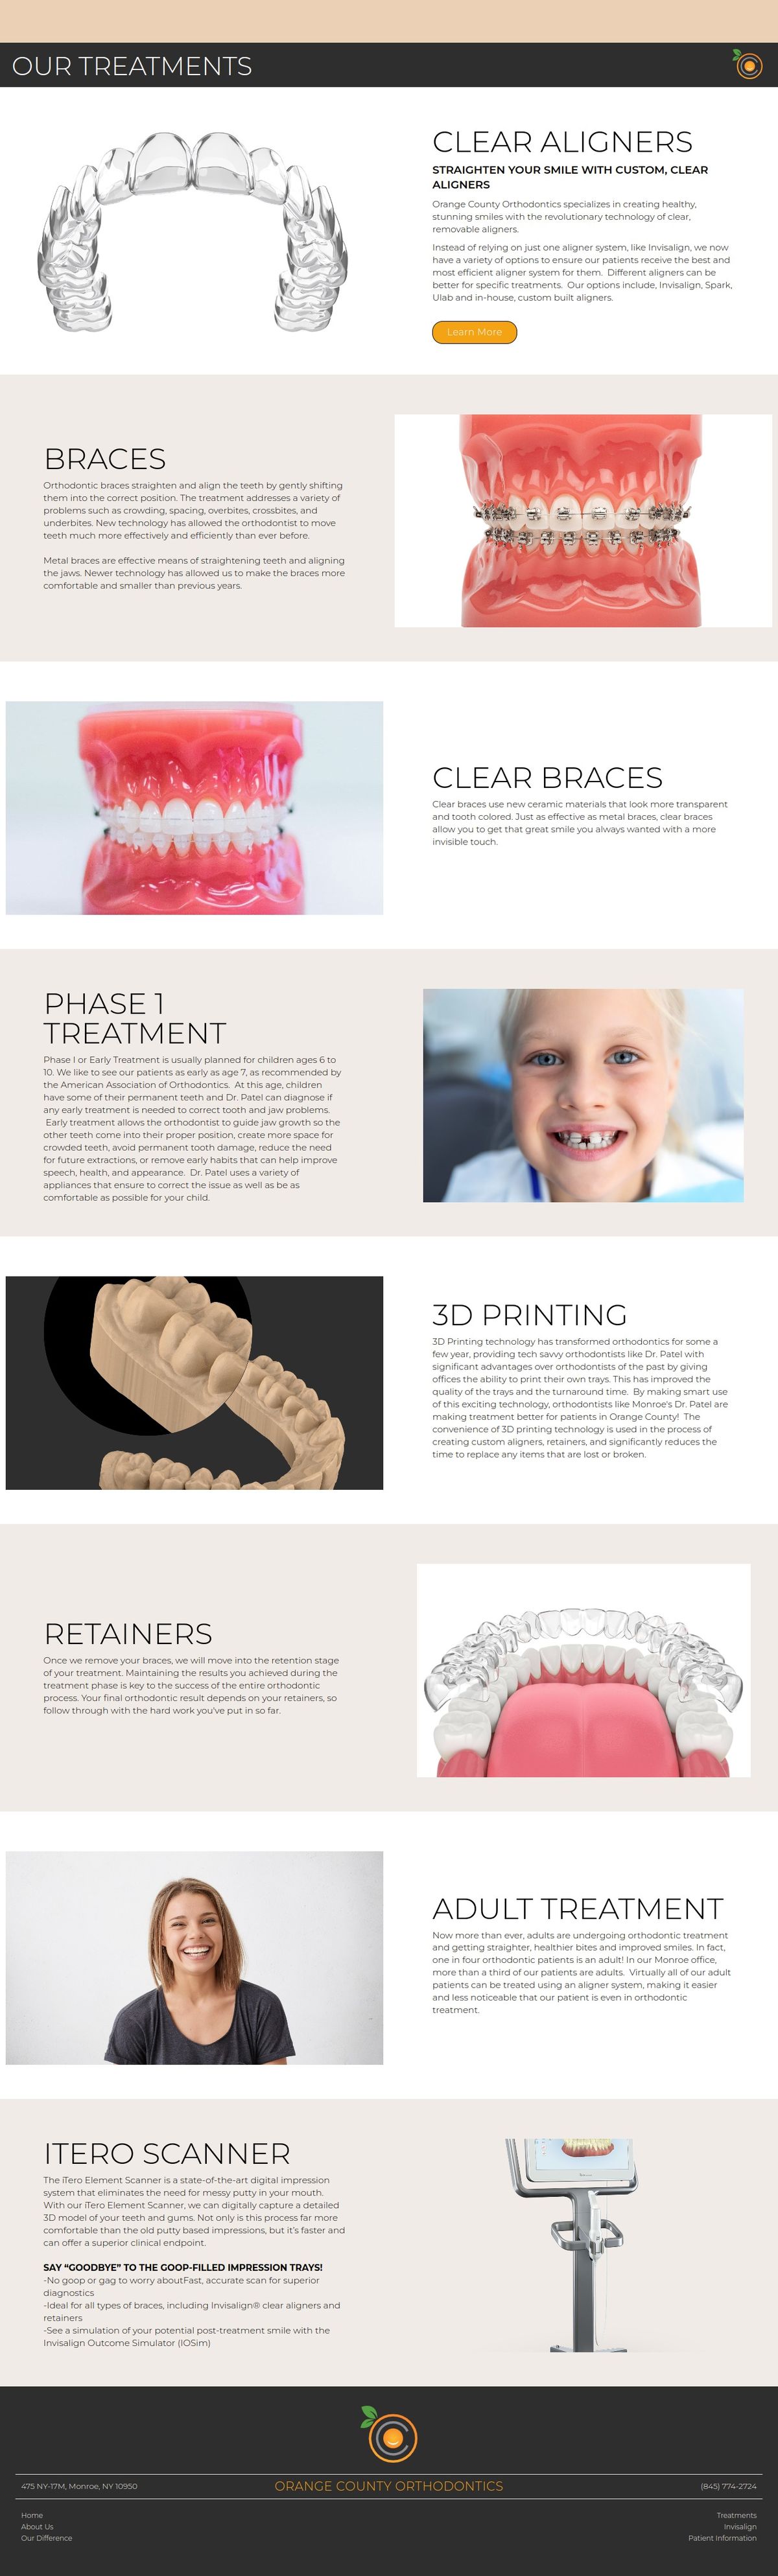 Dropbox - Clear aligner therapy for crowded teeth.jpeg - Simplify your life